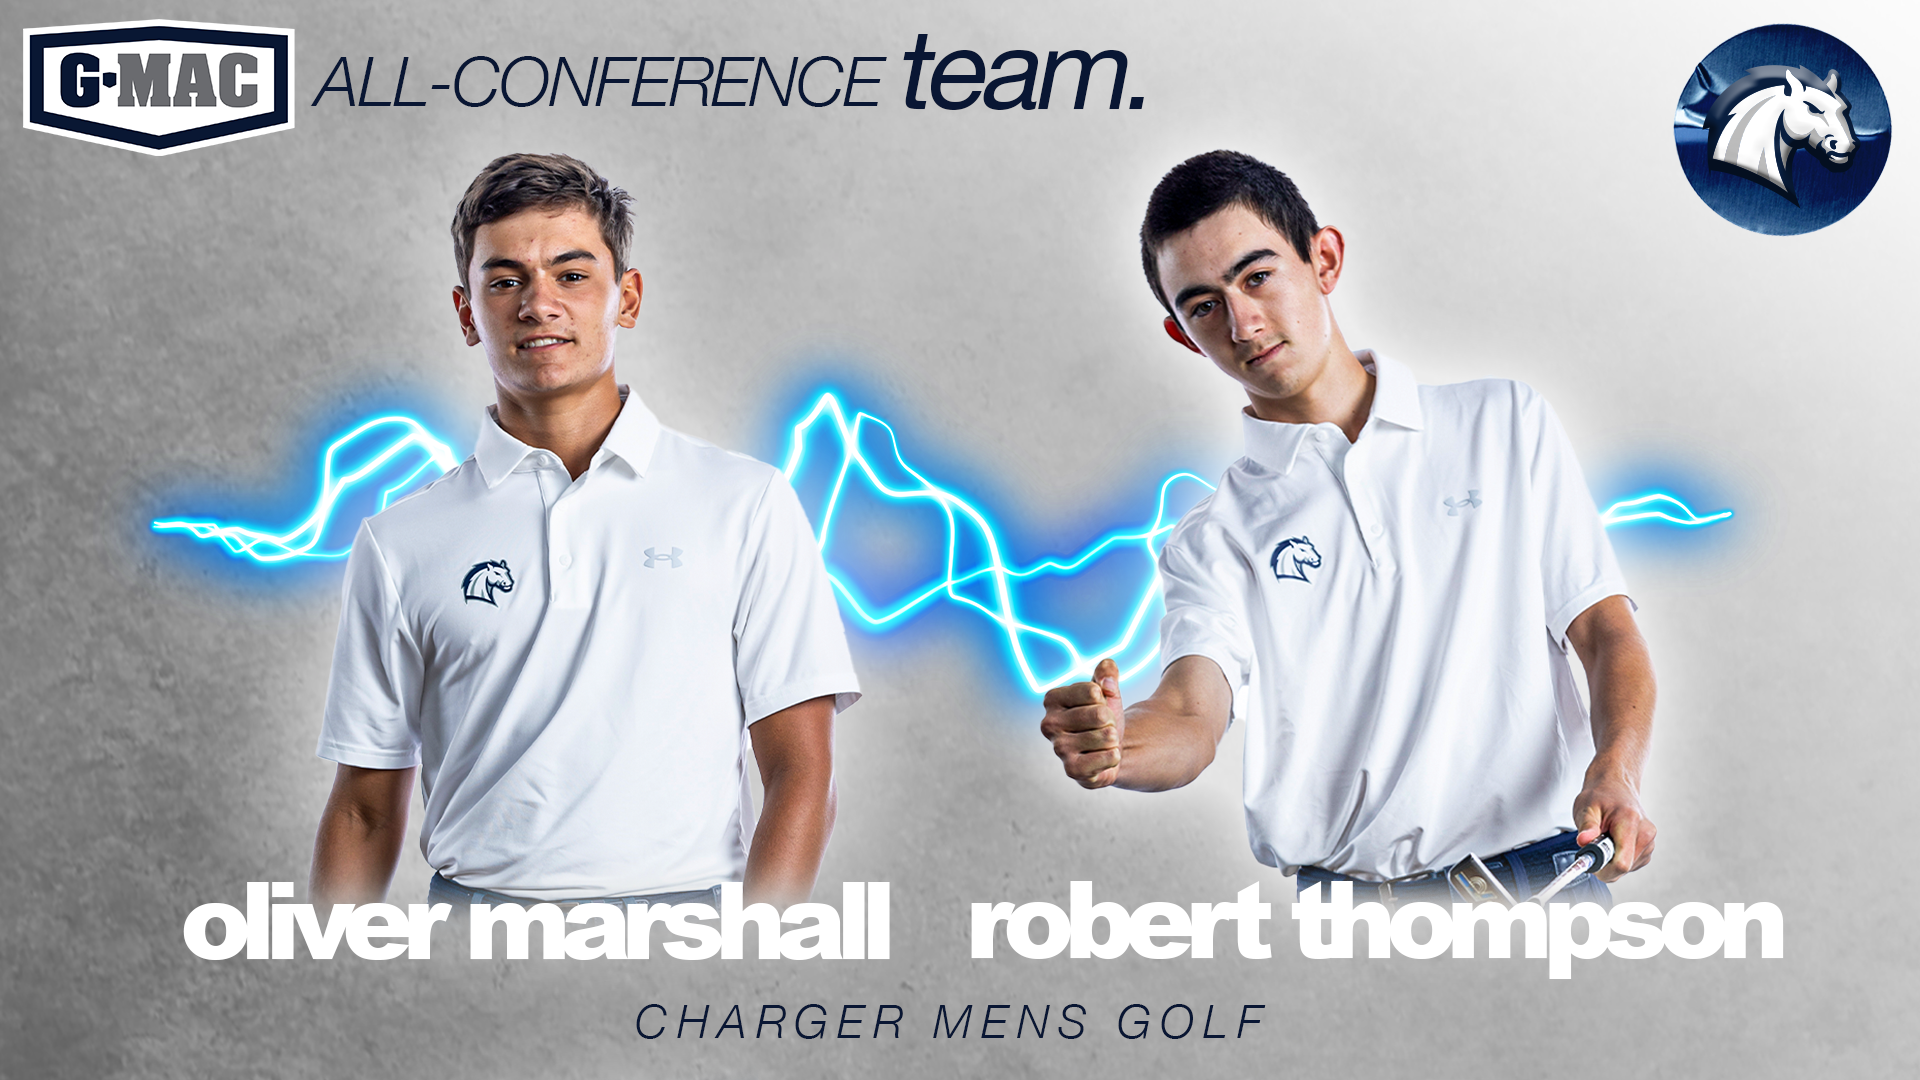 Two Chargers freshmen make G-MAC All-Conference team for men's golf